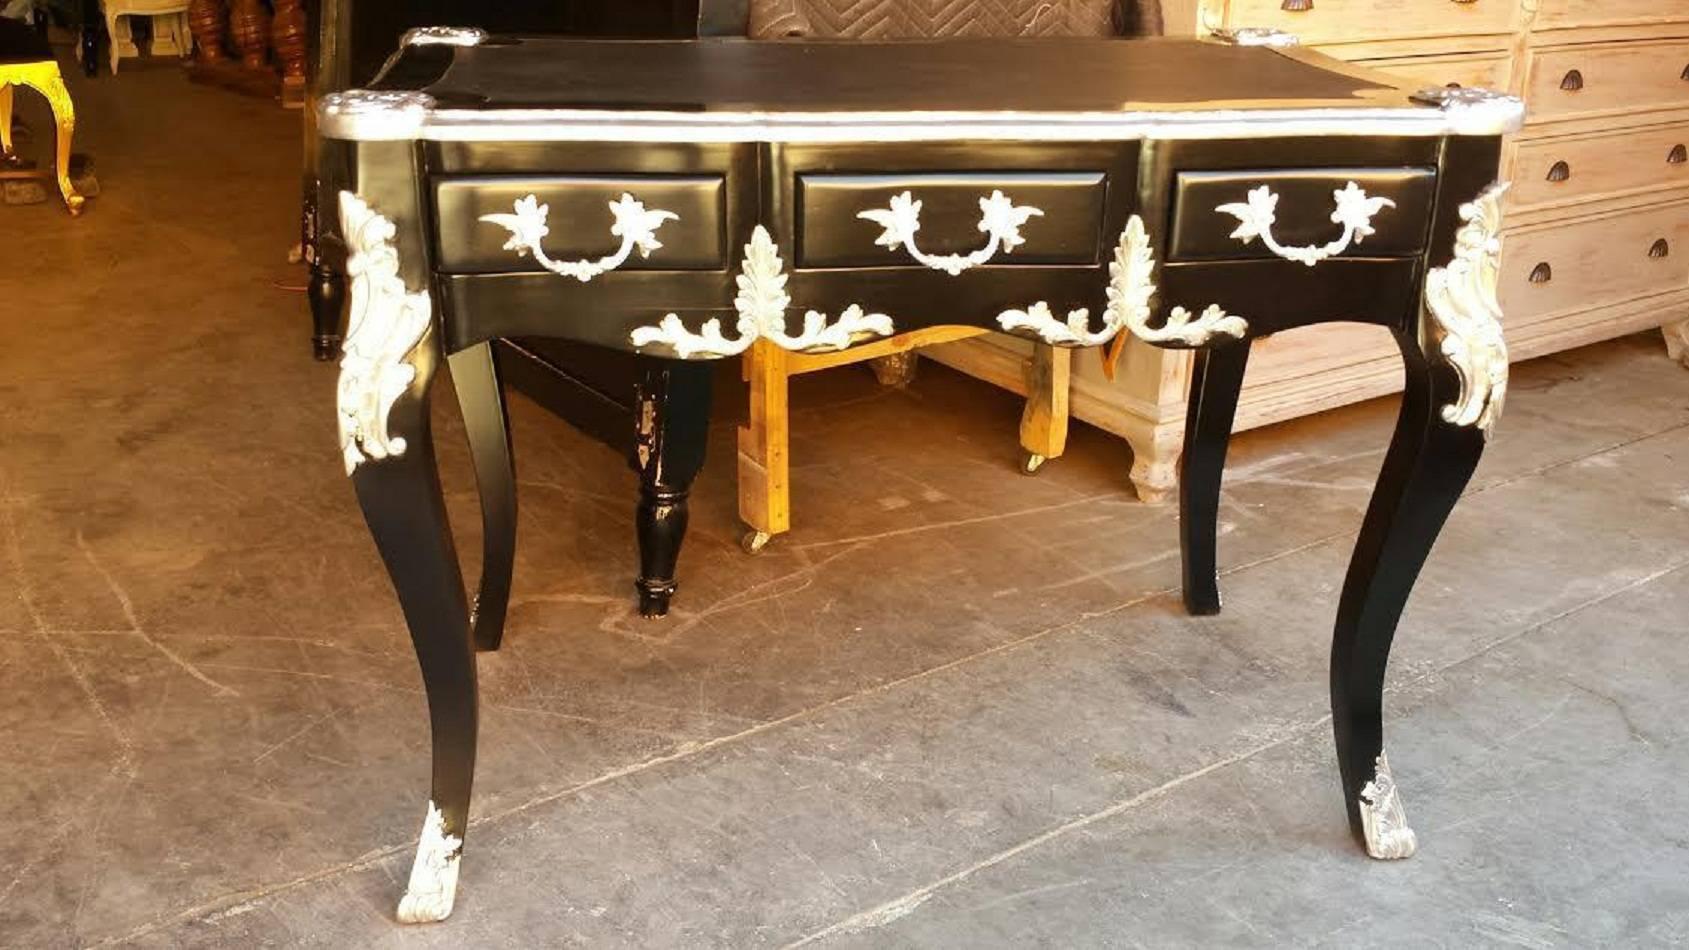 French style, black and silver desk is timelessly chic. This desk features a dramatic black and silver finish, leather top, (perfect for scribbling those handwritten notes!), and three front drawers.